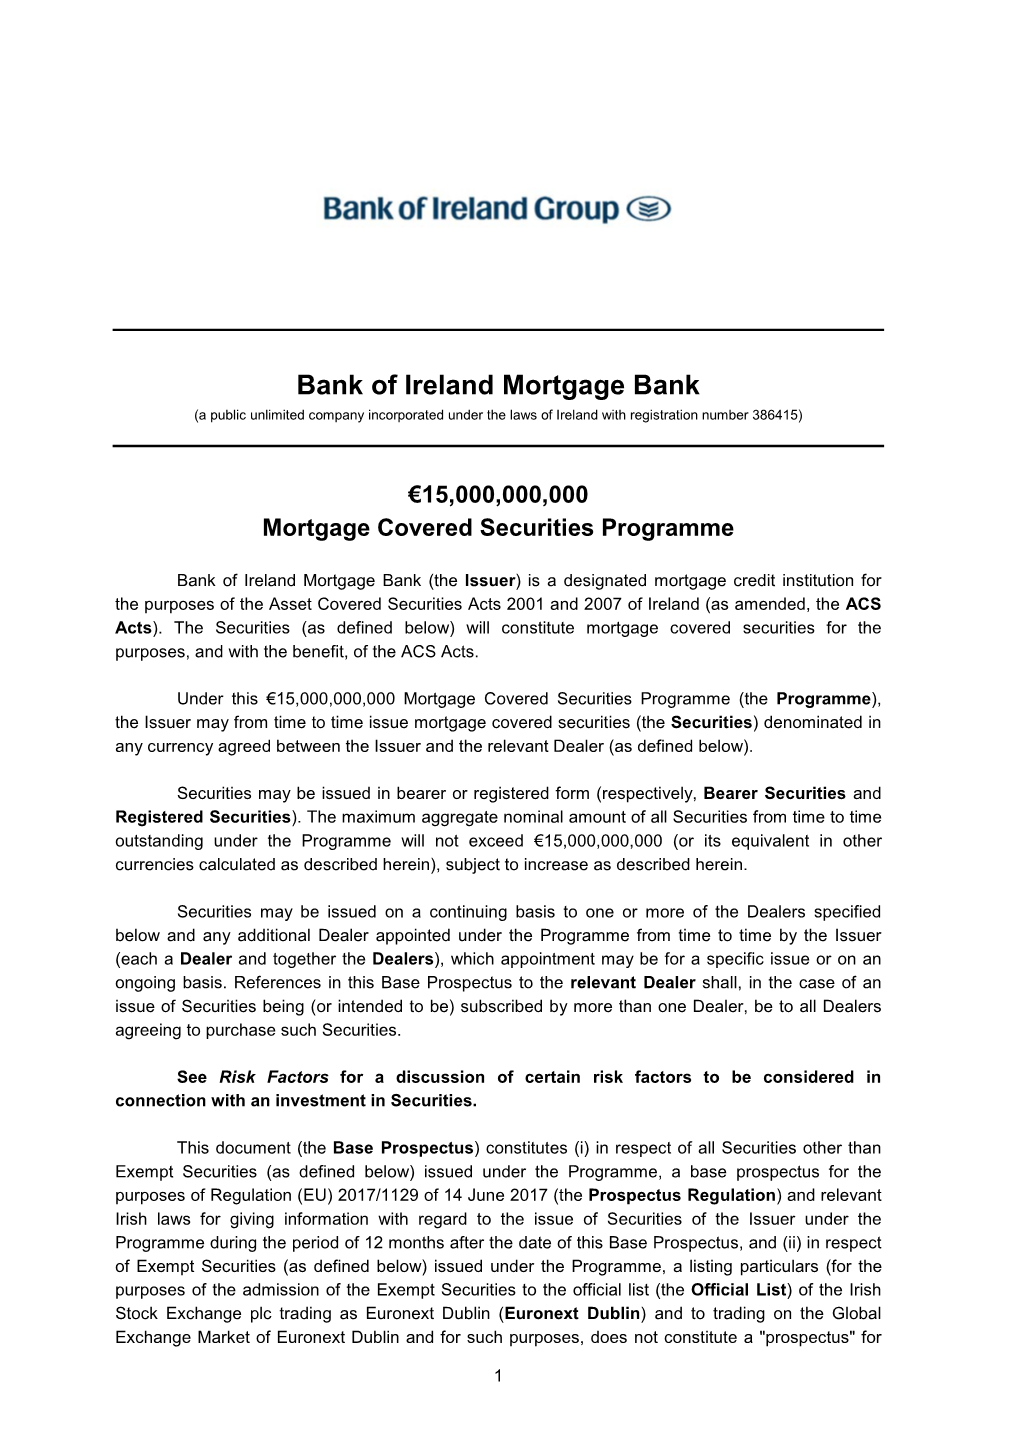 Bank of Ireland Mortgage Bank (A Public Unlimited Company Incorporated Under the Laws of Ireland with Registration Number 386415)